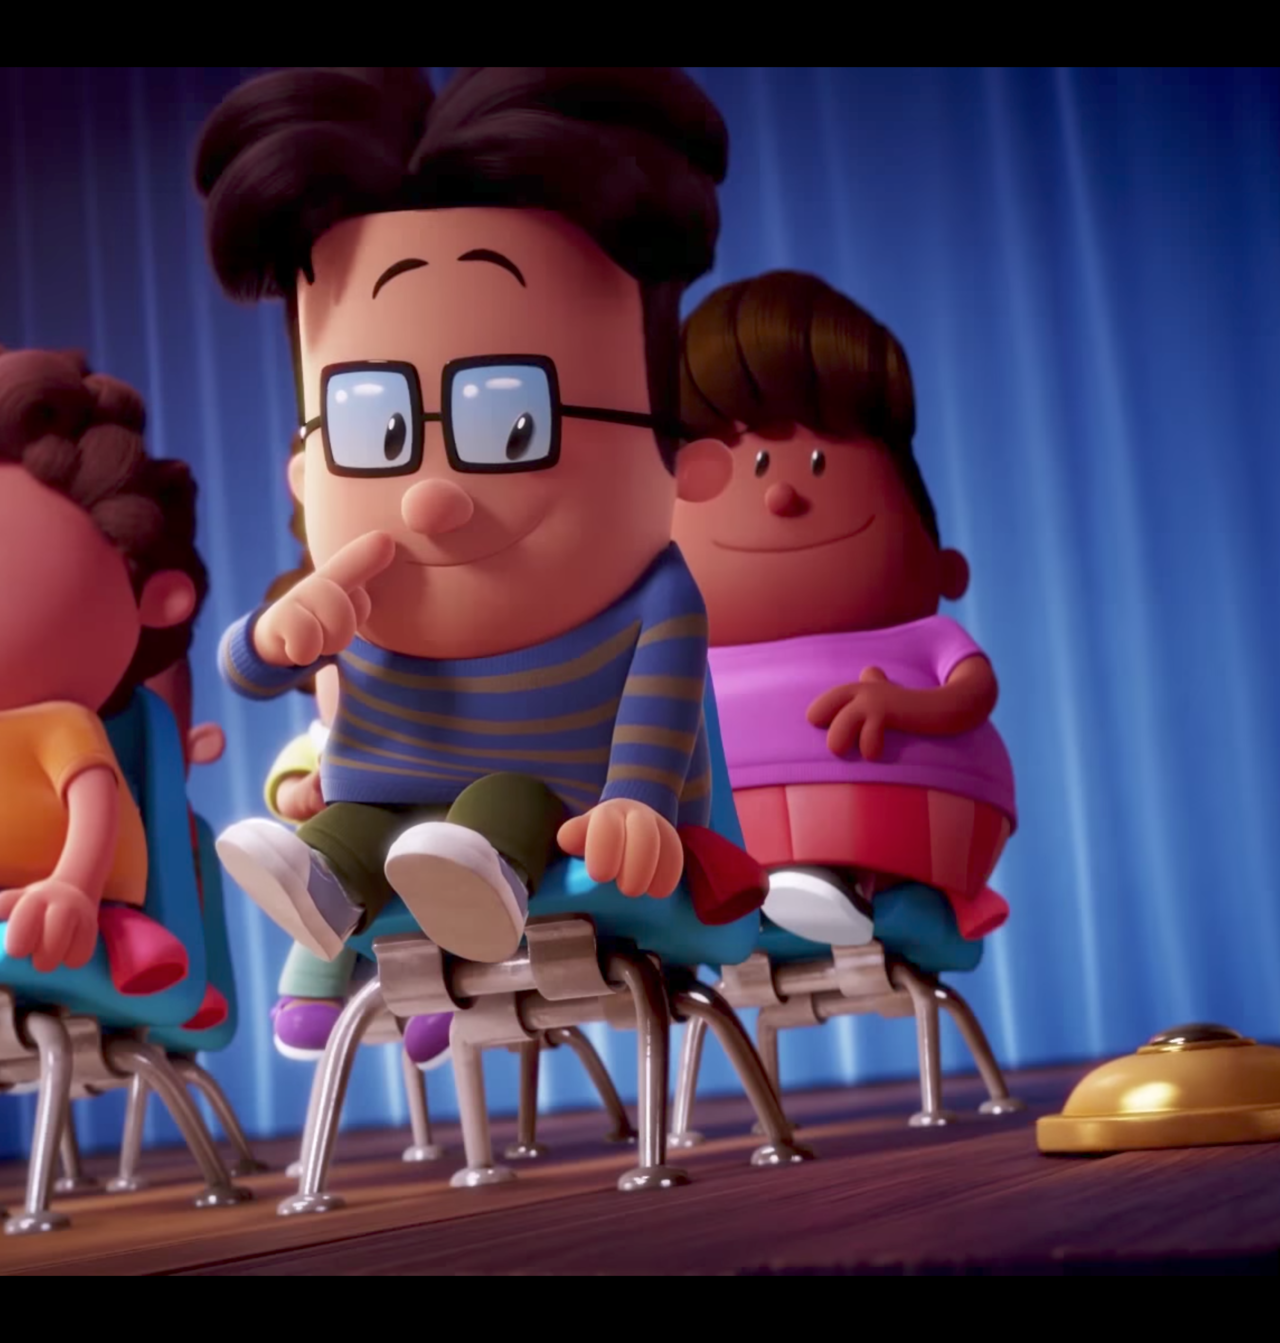 YARN, Hahahahahahahahahahahahahahahahahahahahahahahahahahahahahahahahahahahahahaha  Bird bird bird, Captain Underpants: The First Epic Movie, Trailer #1, Video gifs by quotes, c4b24a1b